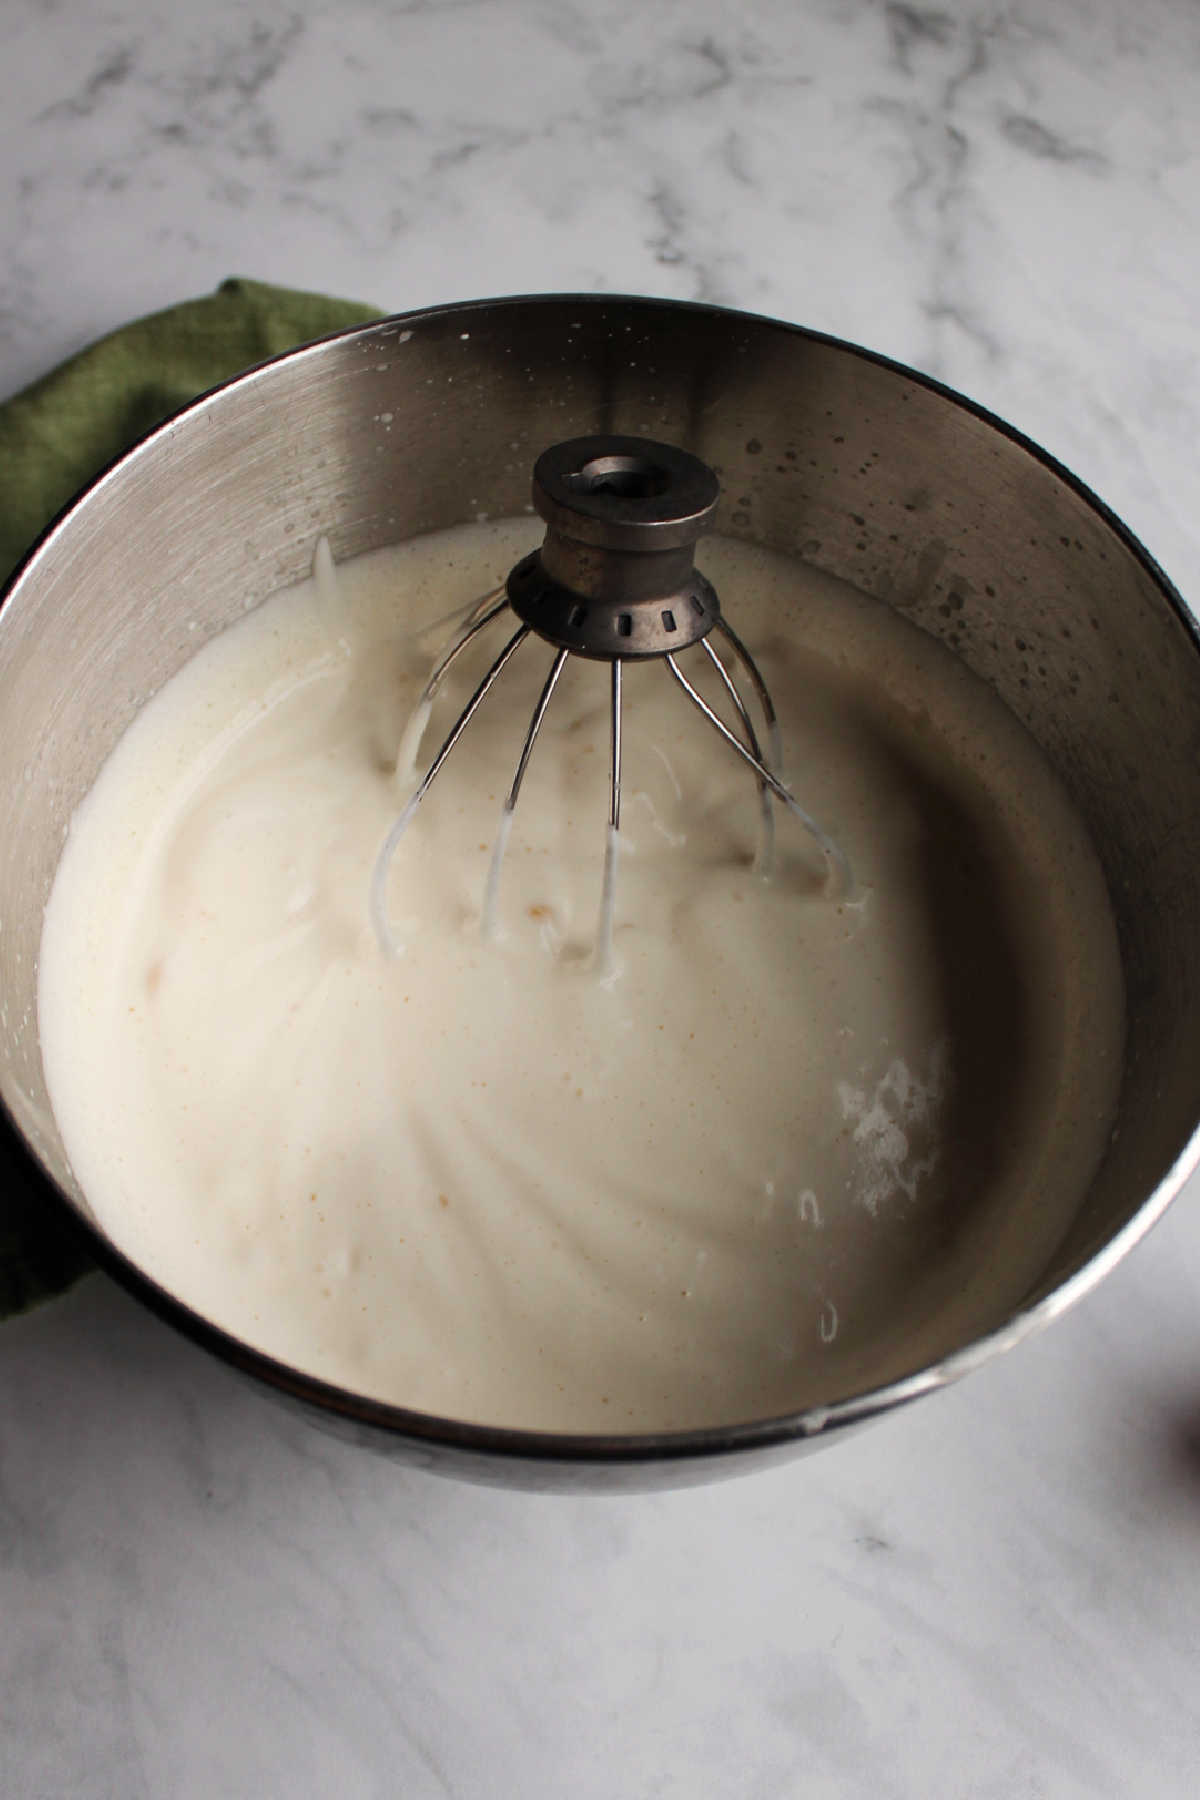 Bowl of whipped evaporated milk ready to top desserts.